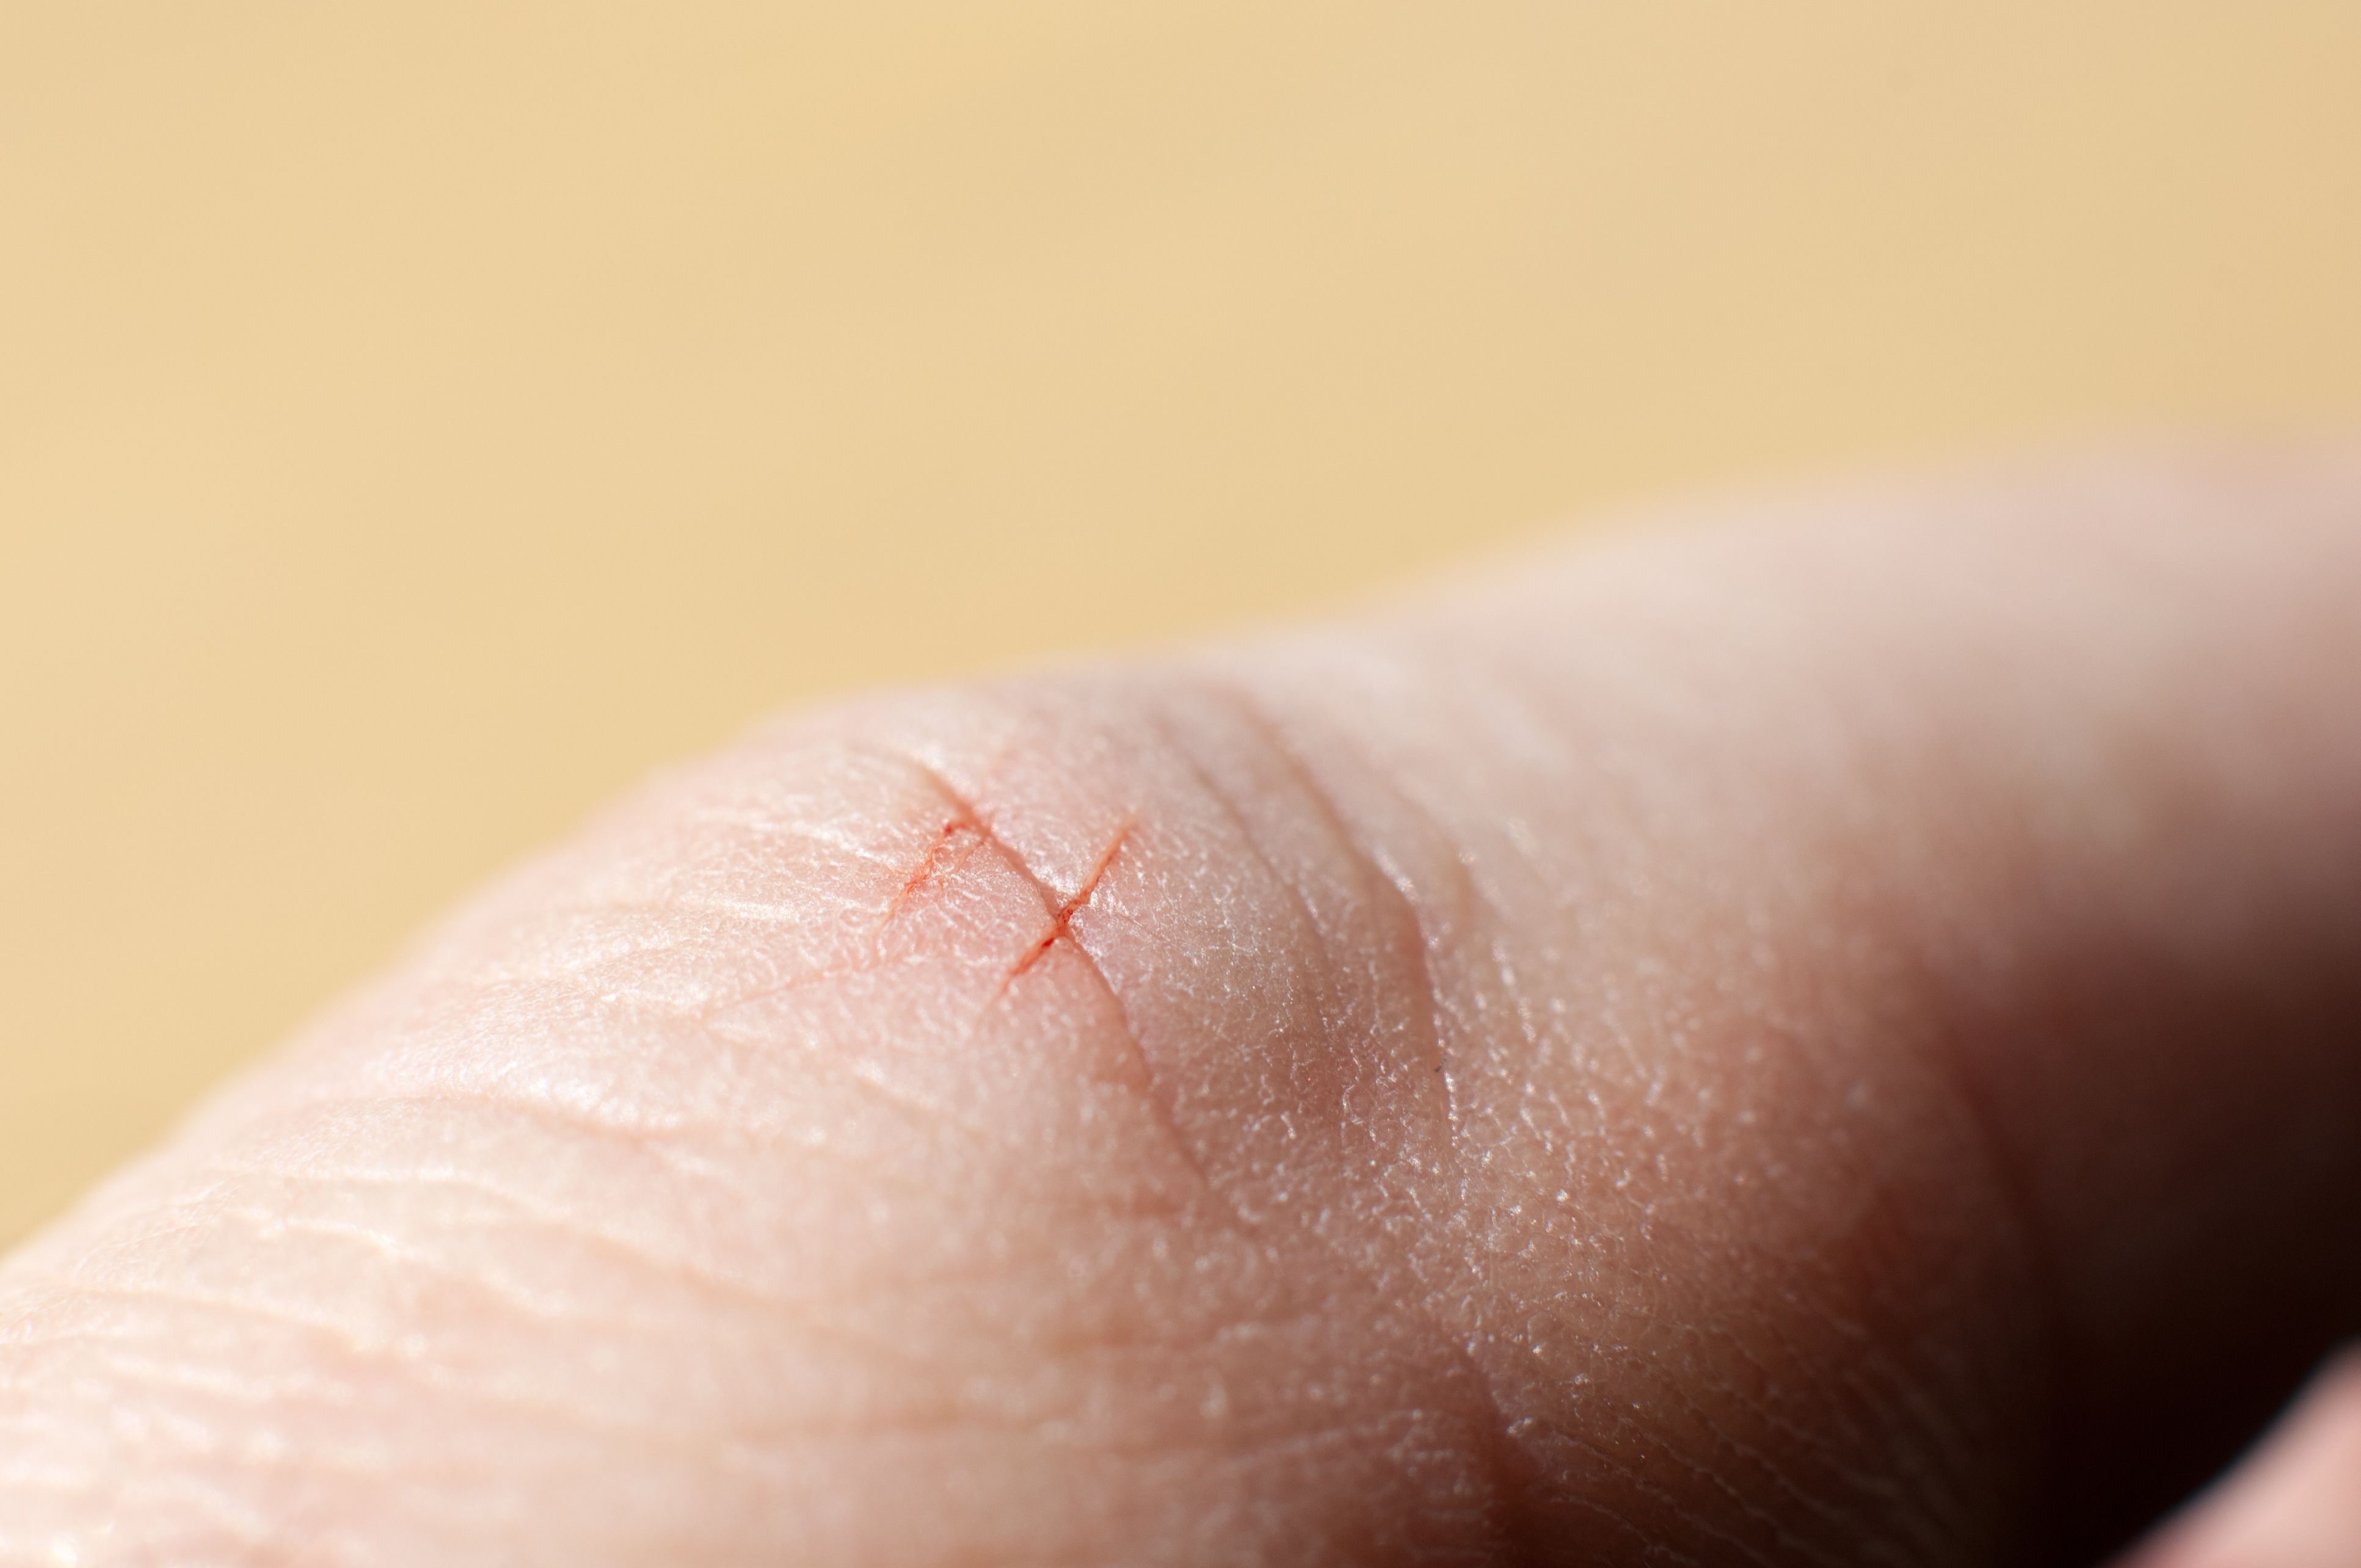 Why a tiny paper cut can cause such agony